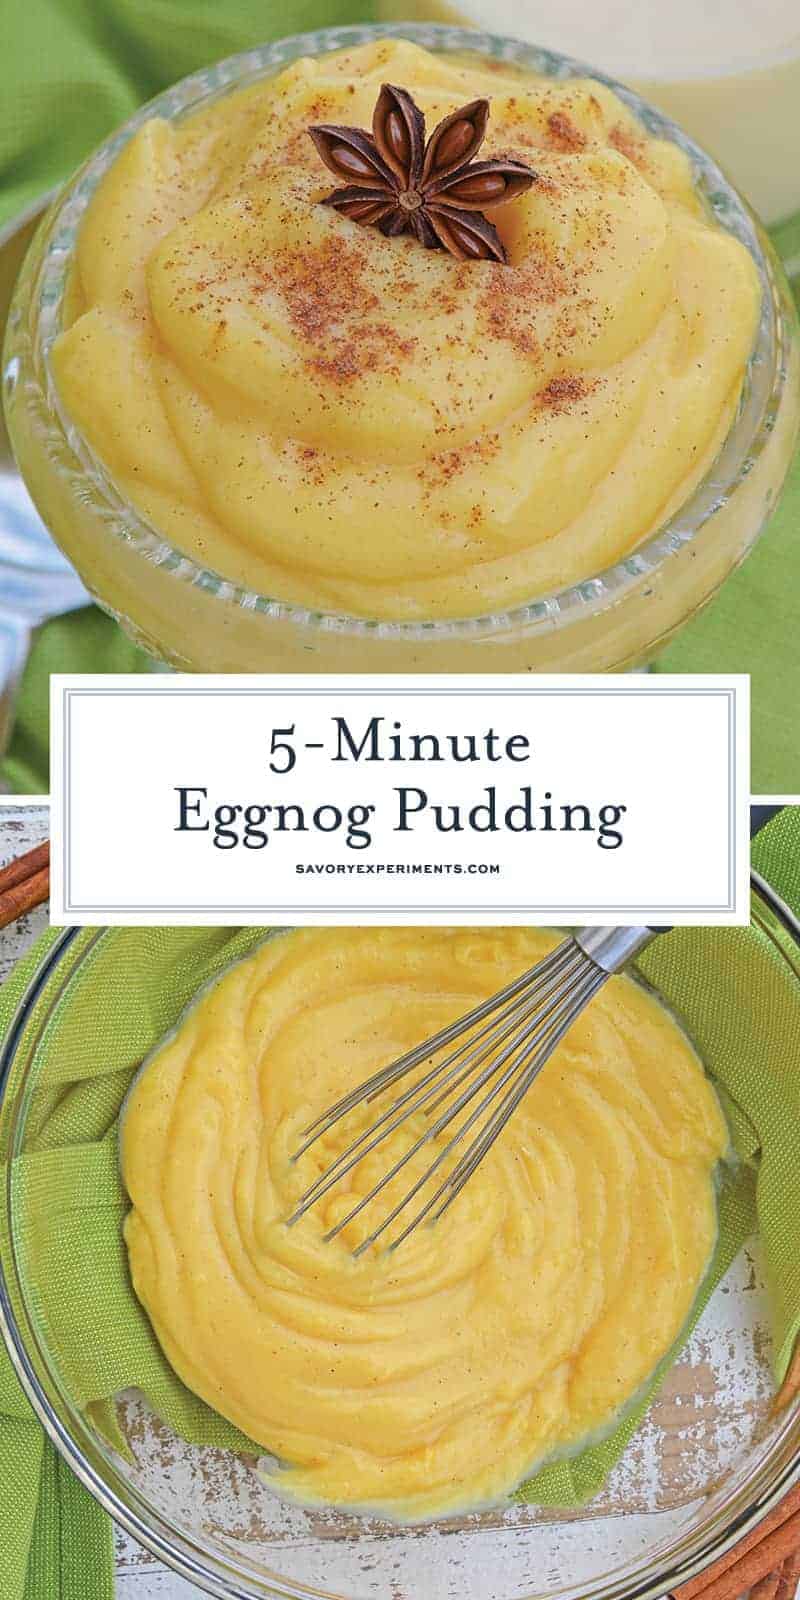 This 5-Minute Eggnog Pudding is one of the tastiest homemade pudding recipes you'll ever make, with instant pudding and a few festive ingredients! #puddingrecipes #eggnogpudding #homemadepudding www.savoryexperiments.com